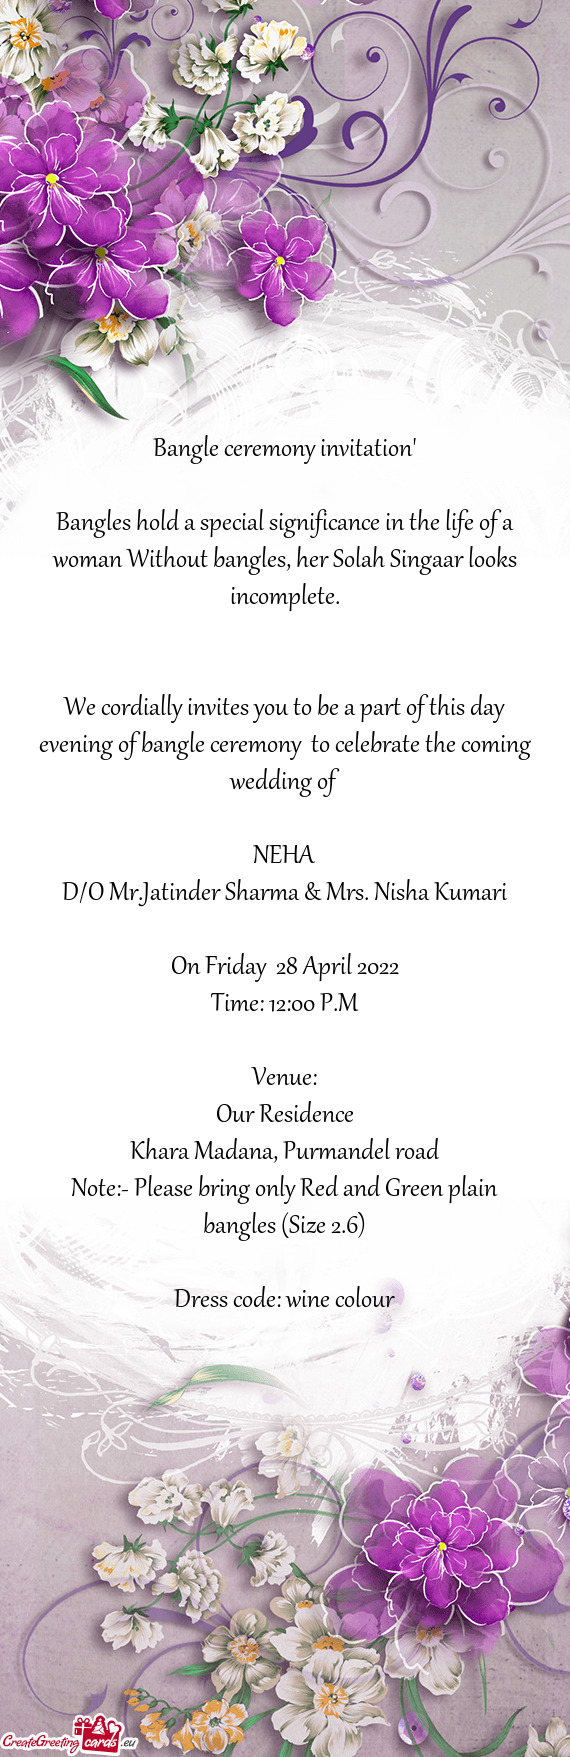 We cordially invites you to be a part of this day evening of bangle ceremony to celebrate the comin